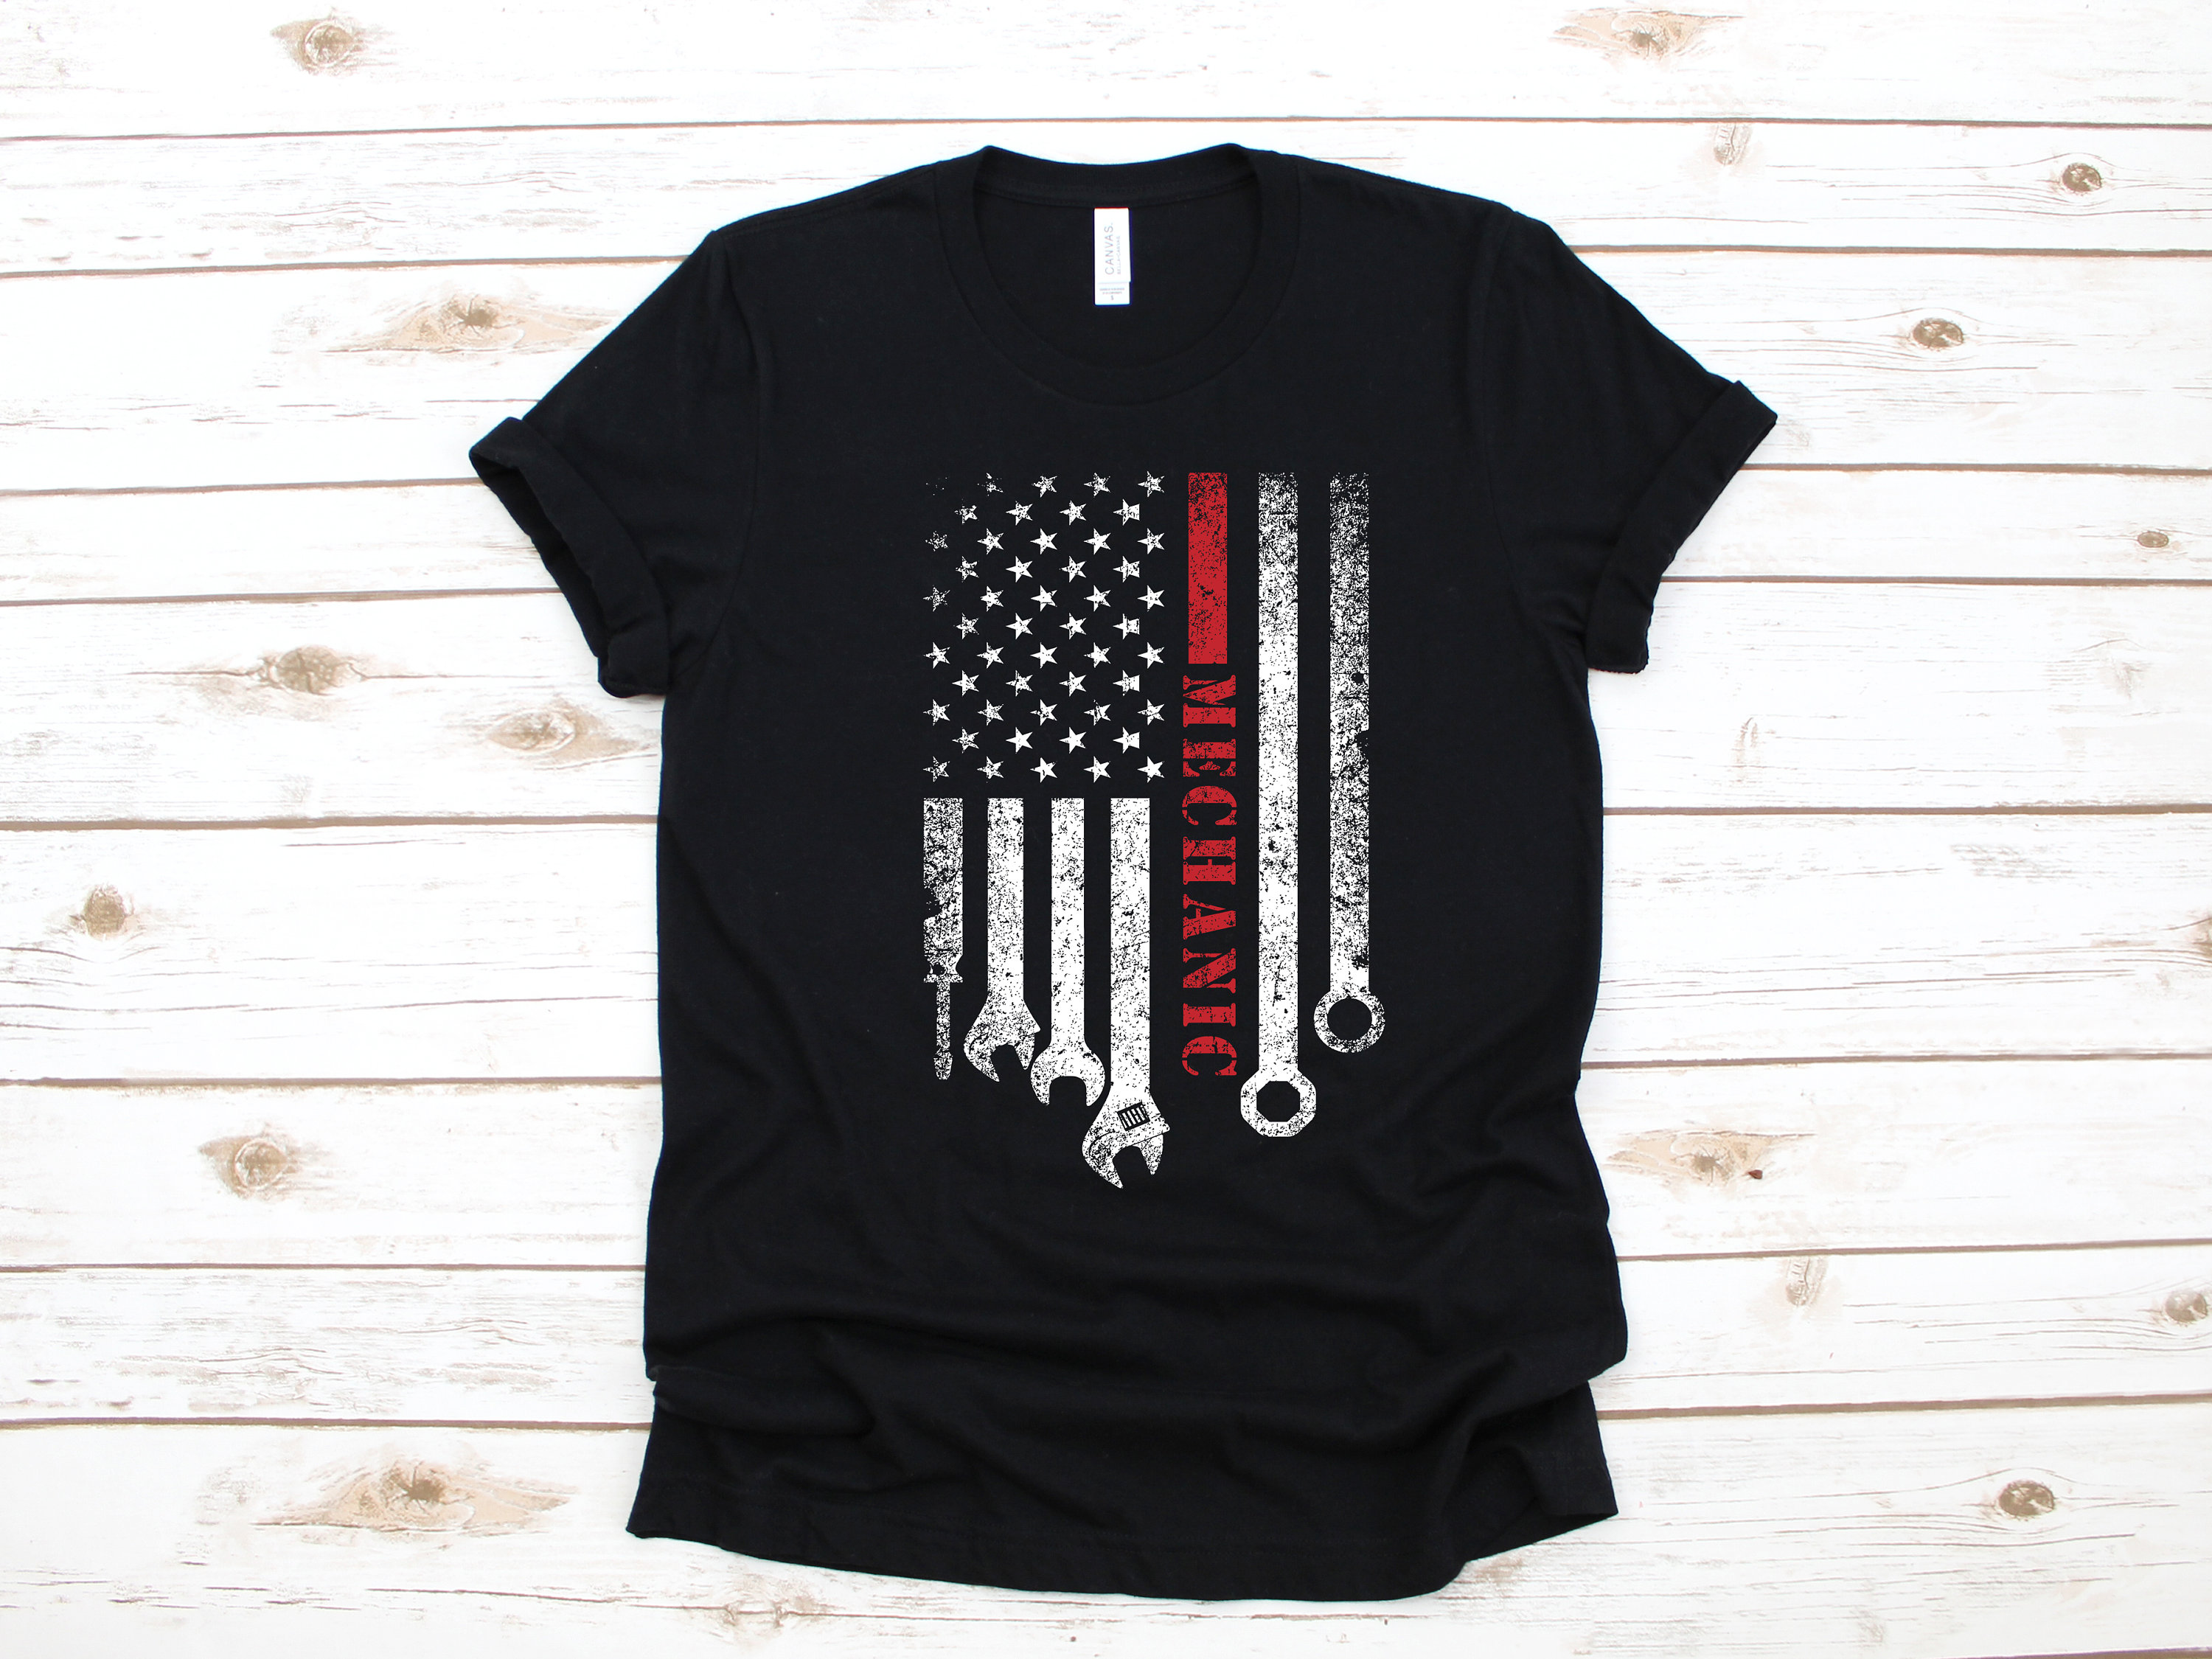 Patriotic and Mechanic-inspired Statement Everyday-Wear Shirt